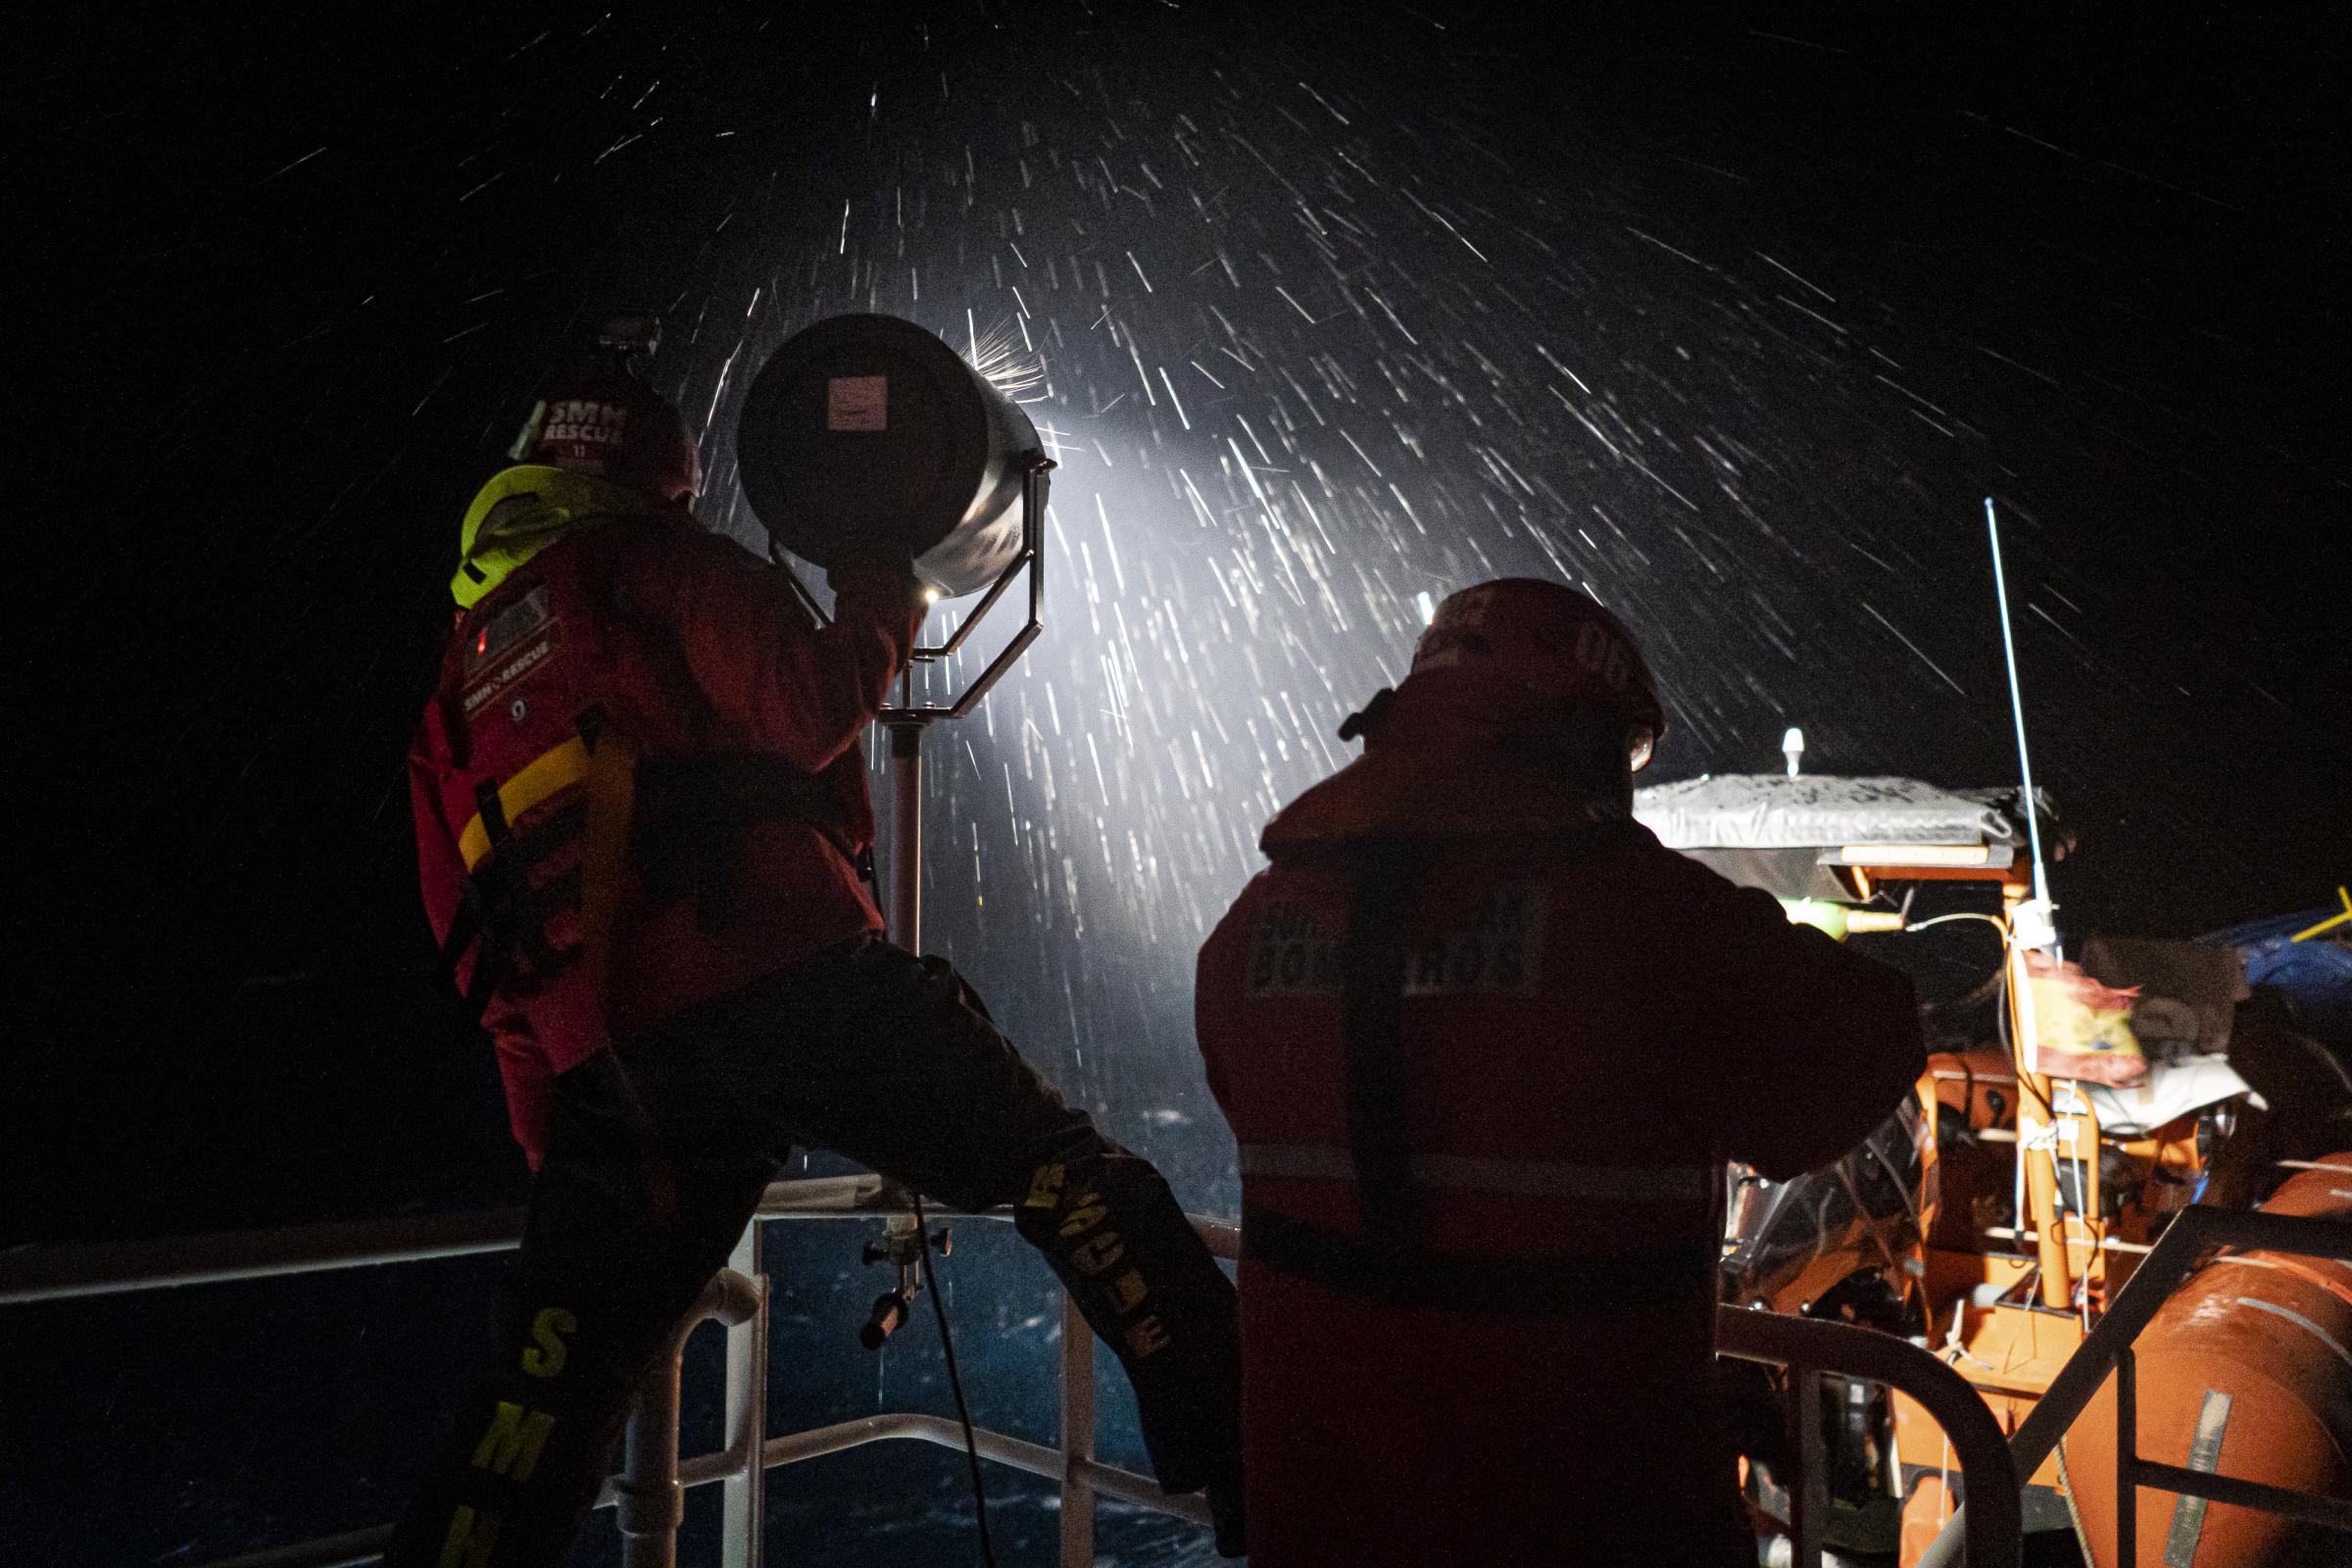  Edouard (left) and Pablo (right) shine a spotlight during the search for a drifting wooden boat...